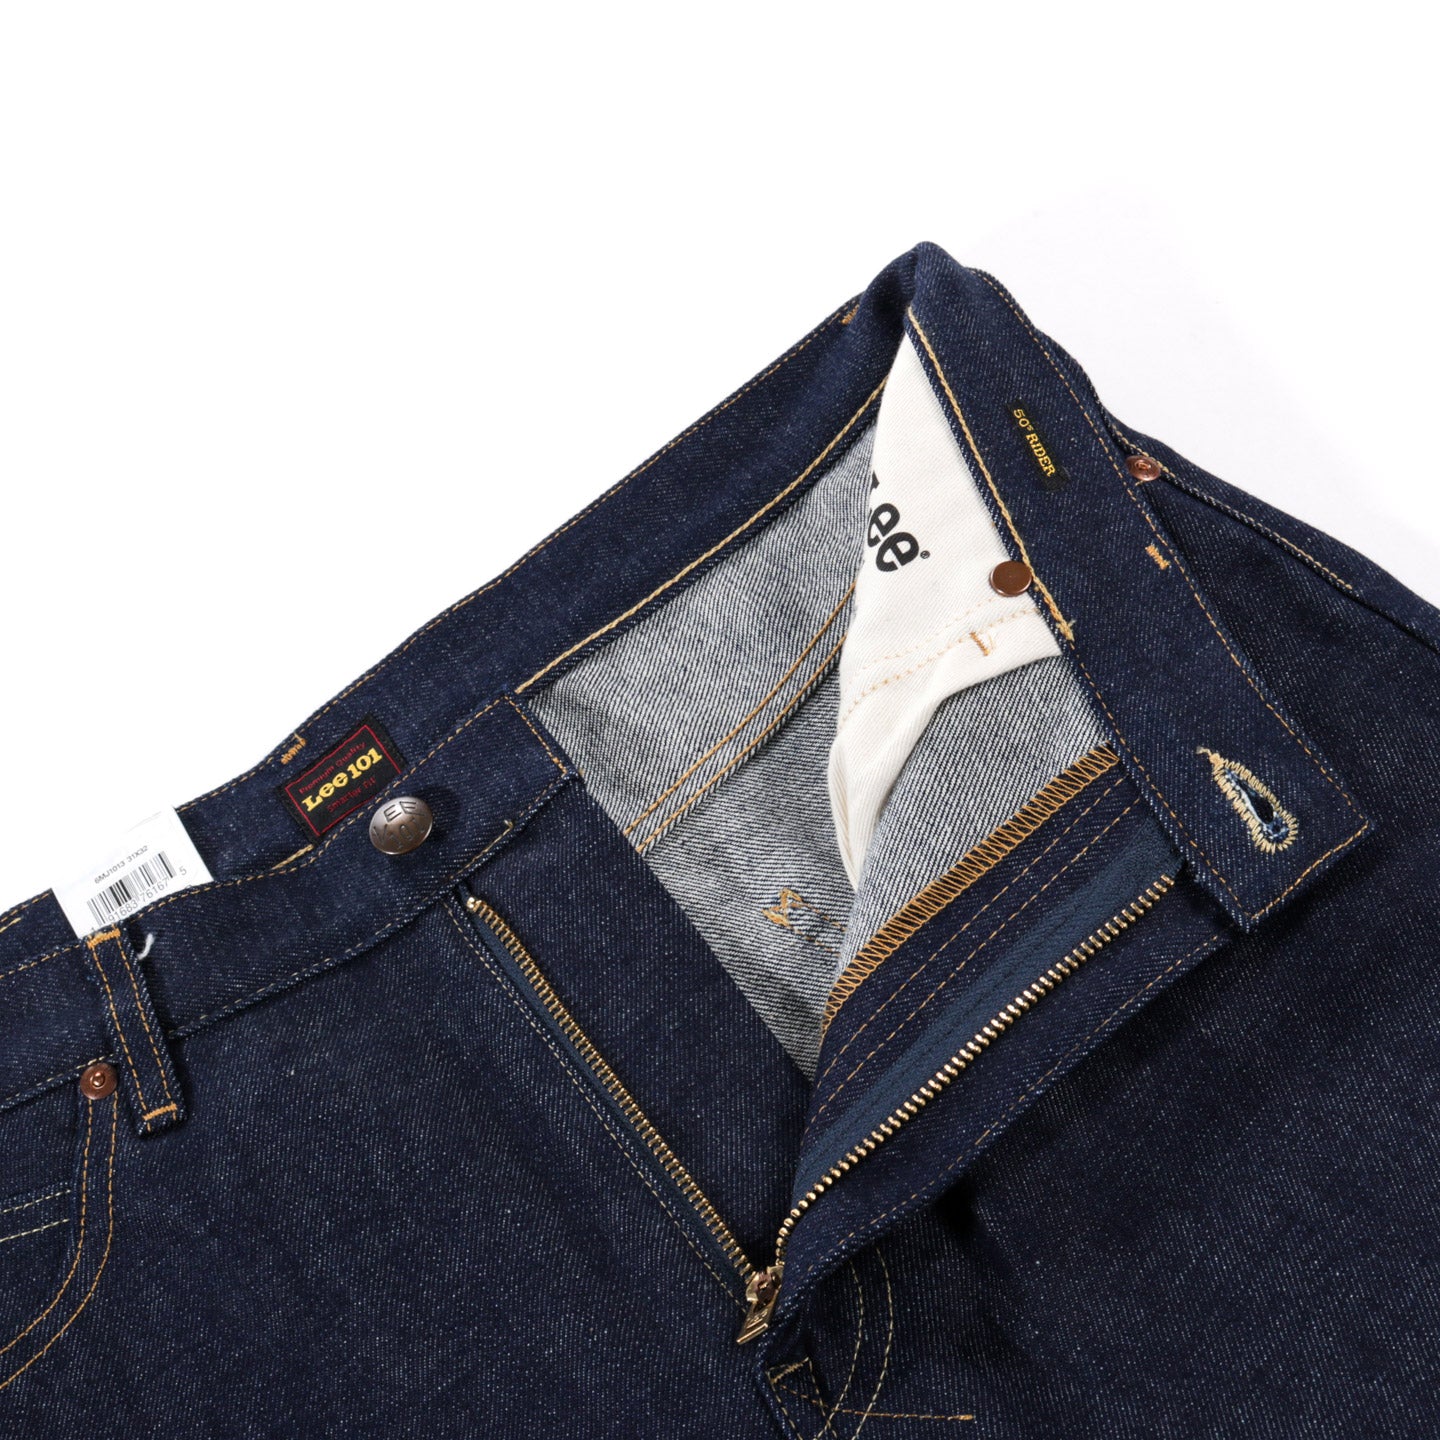 LEE 101 50'S RIDER SELVAGE DRY